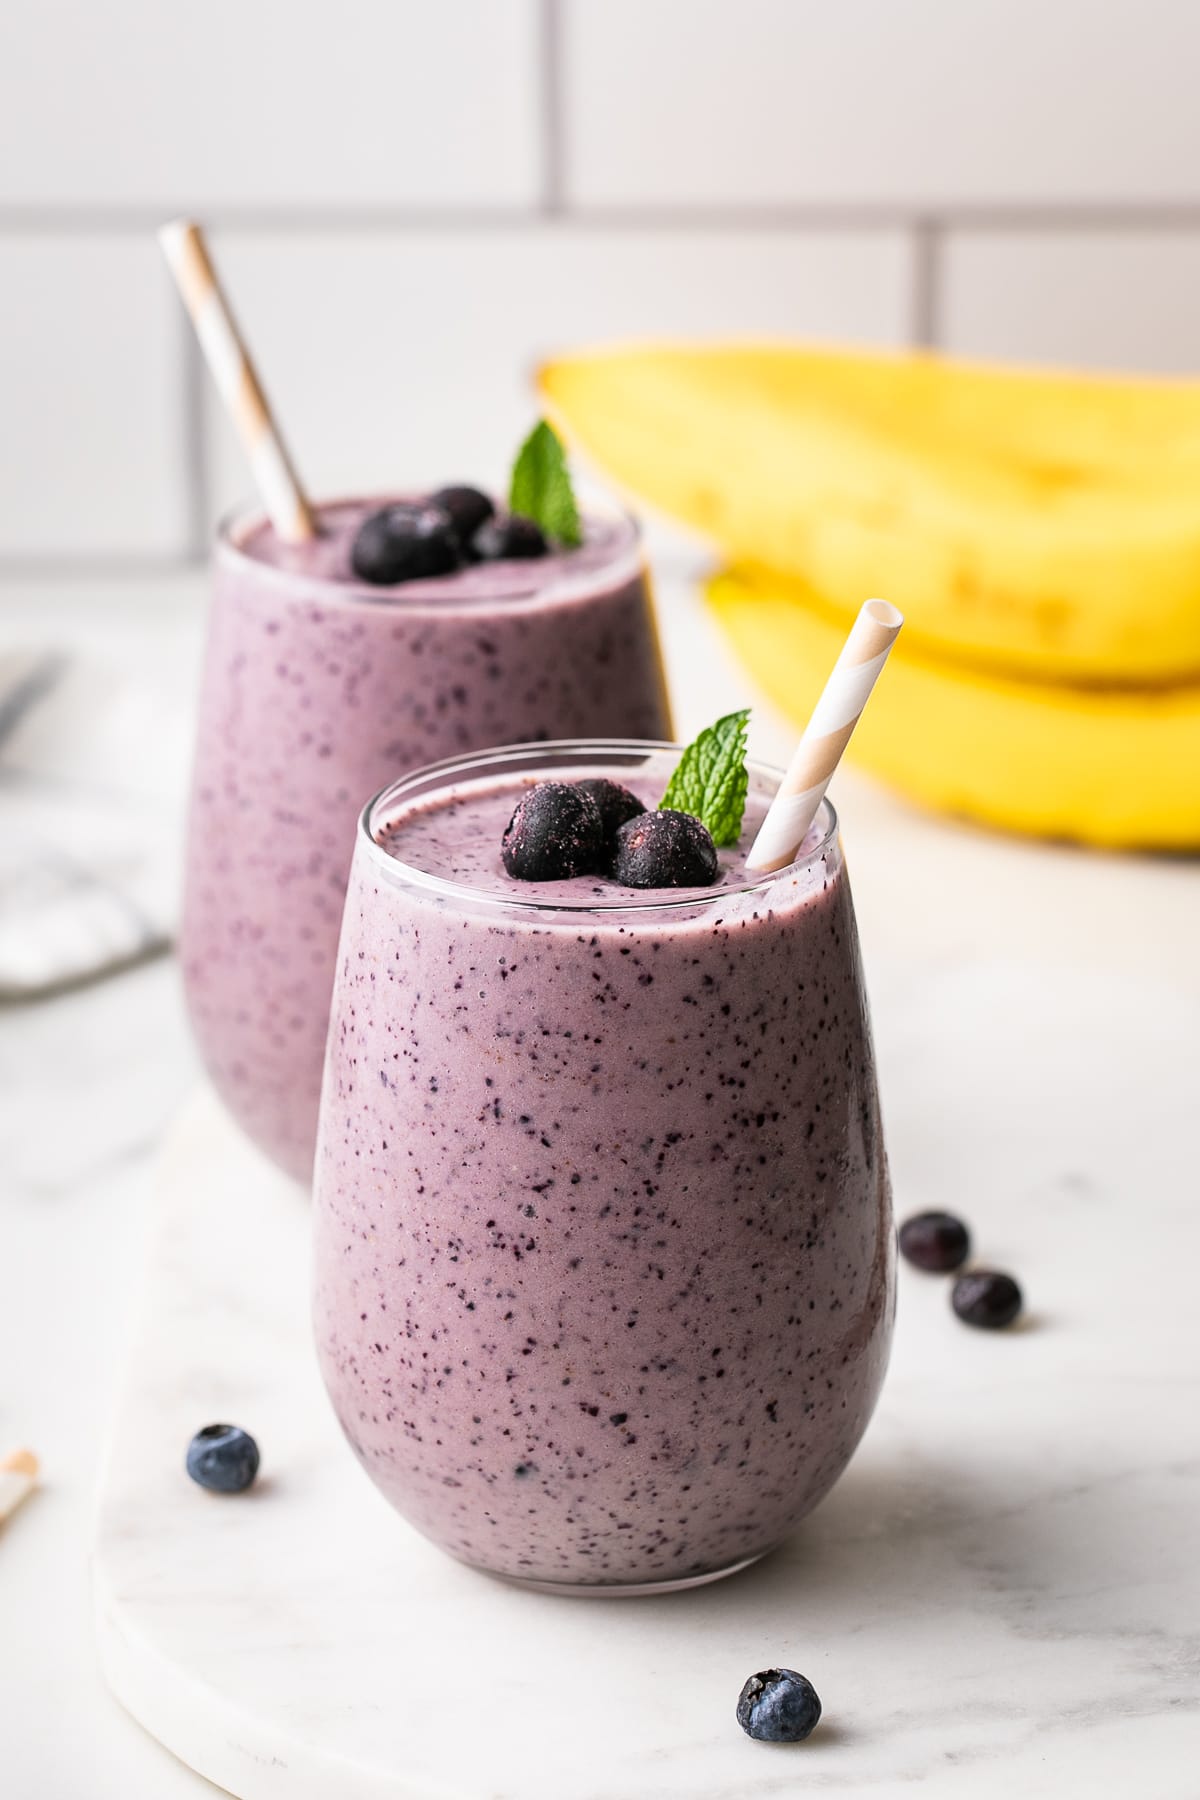 head on view of glass full of blueberry banana smoothie with straw and items surrounding.